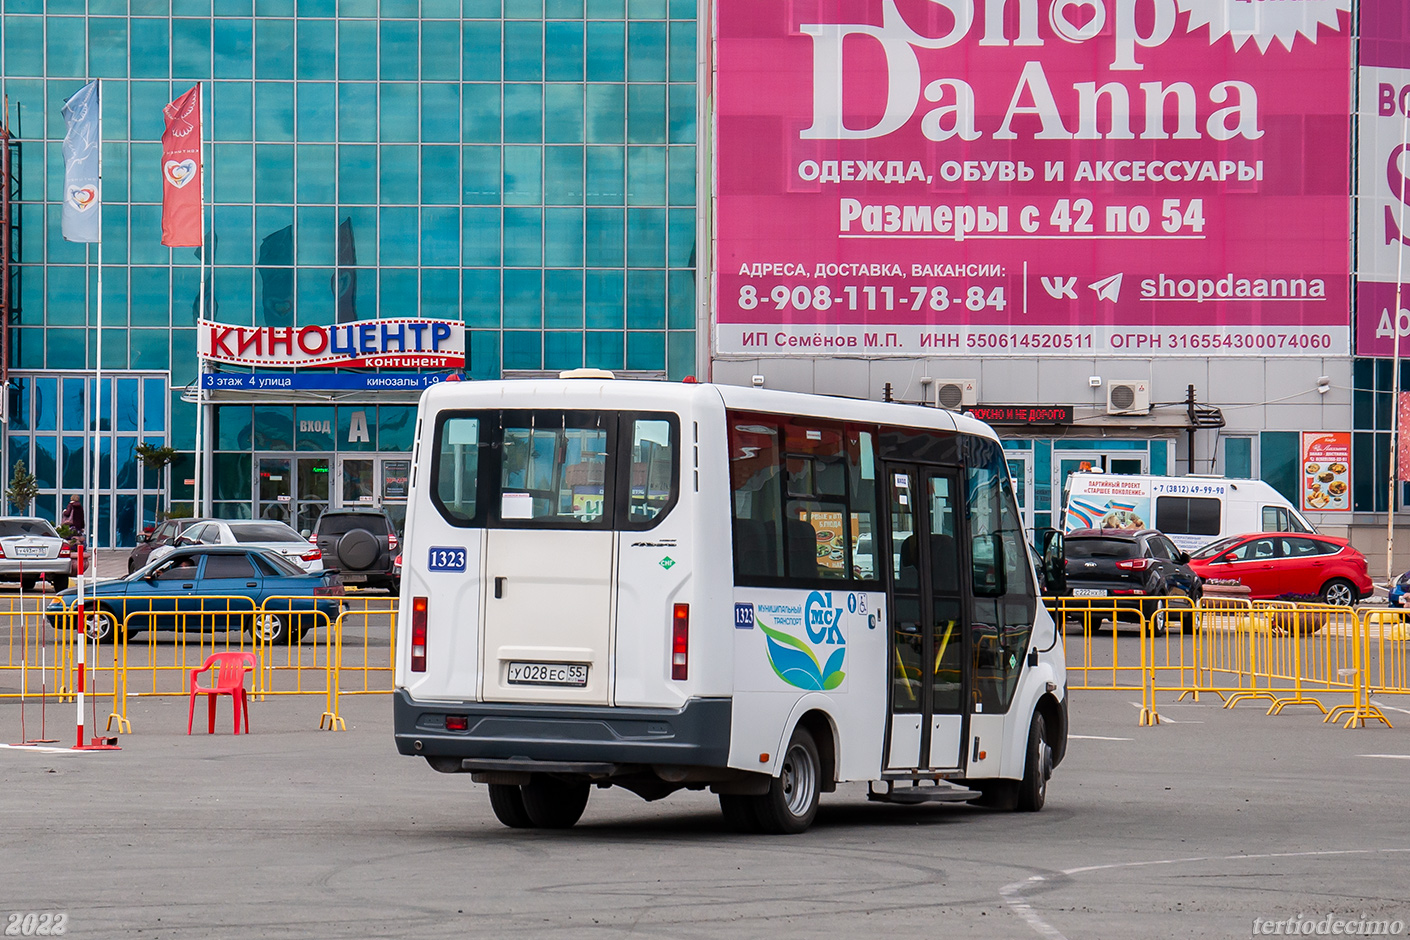 Omsk region, Luidor-2250DS (GAZ Next) Nr. 1323; Omsk region — 19.08.2022 — XXIII City competition of professional skills of bus drivers